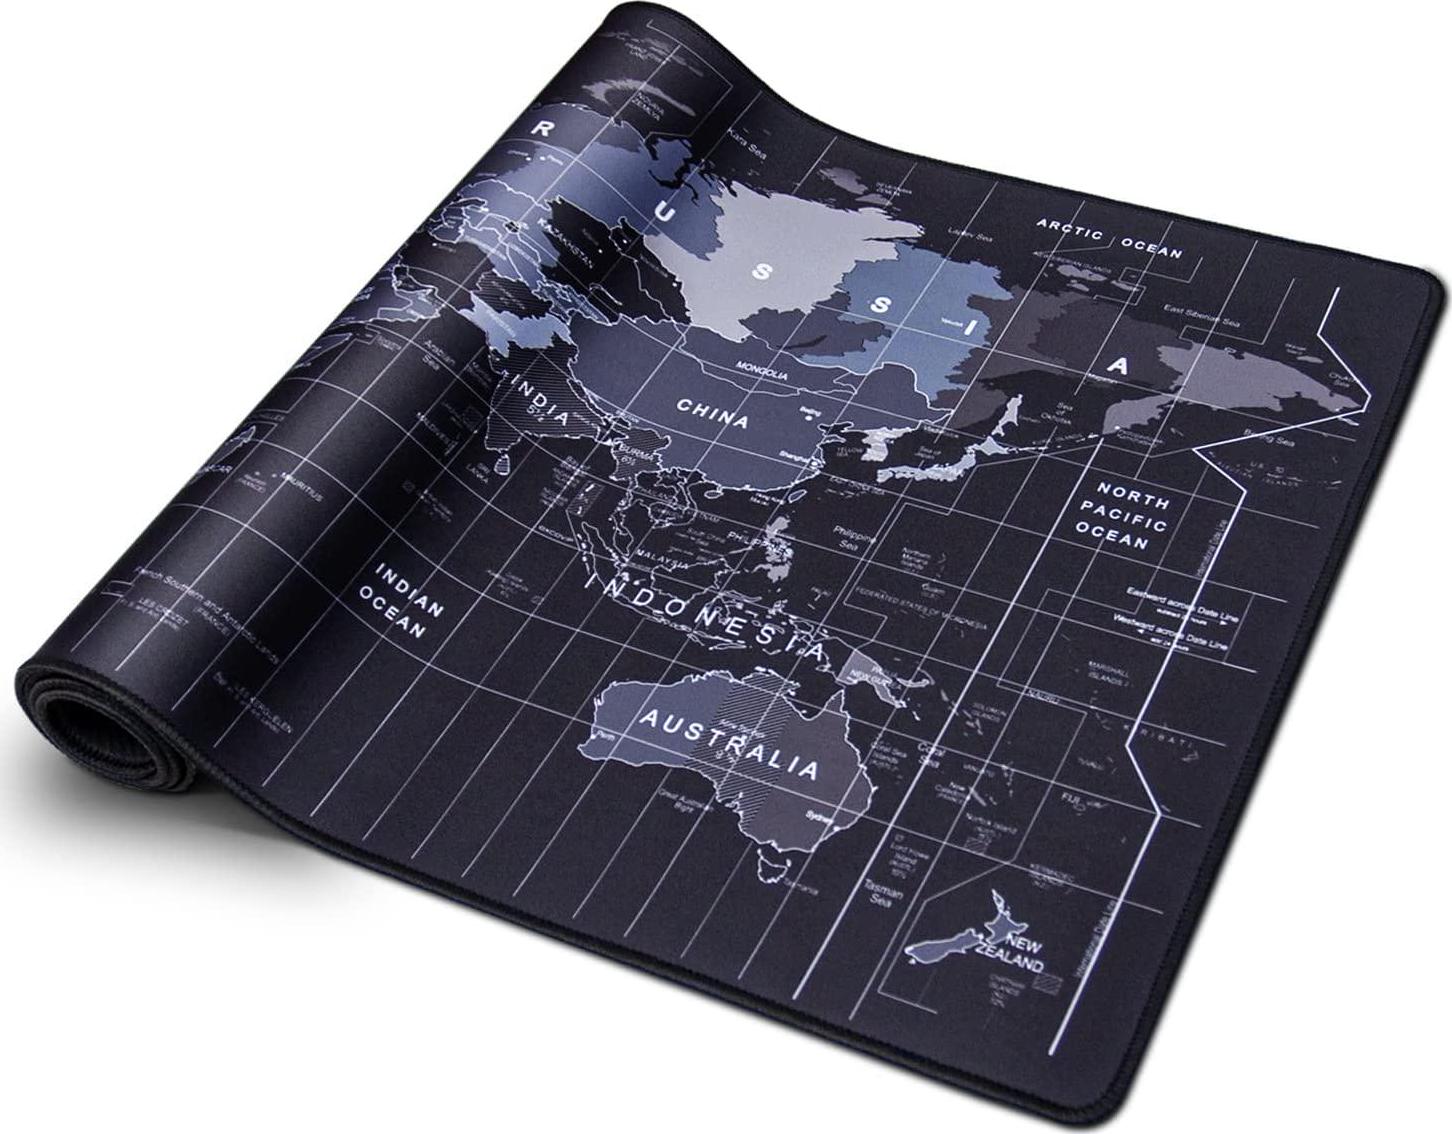 EXCO, Extra Large Gaming Mouse Pad XXL EXCOVIP Stitched Edges Mousepad Desk Mat (35.4 x 15.7 inch) Rubber Bottom Mouse Desk Pads for Gamers Computer, PC and Laptop Keyboard and Mouse (World Map) 4844